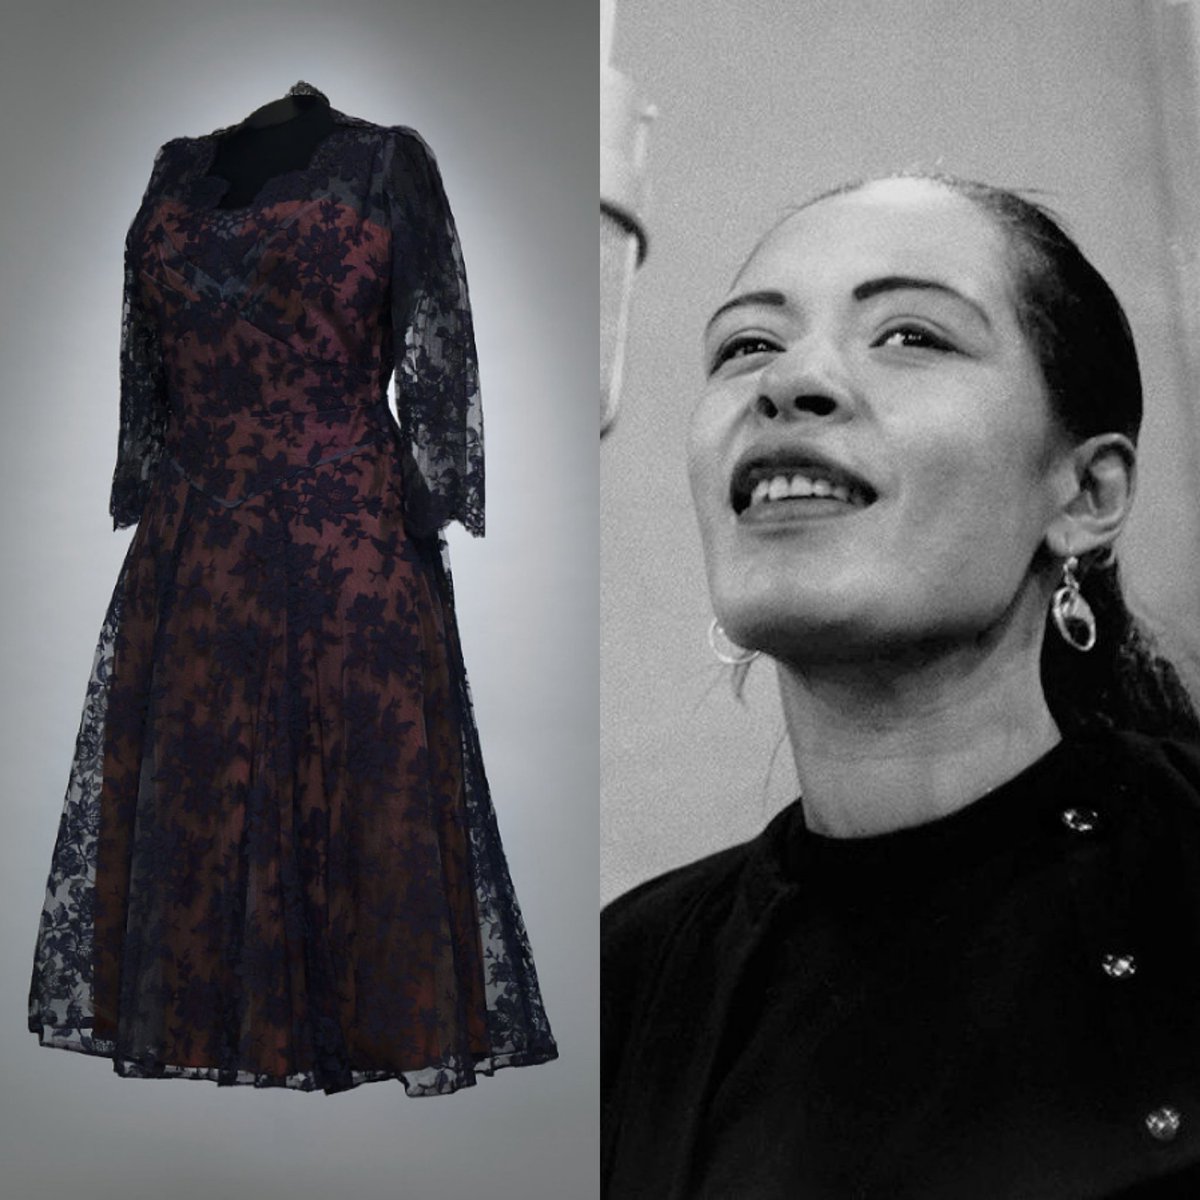 American jazz and swing singer Eleanora Fagan, known professionally as Billie Holiday, was born #OnThisDay in 1915. She wore this Andora New York rust satin strapless cocktail dress with black lace overlay in the early 1950s. @NMAAHC collection. #FashionHistory #singer #dress